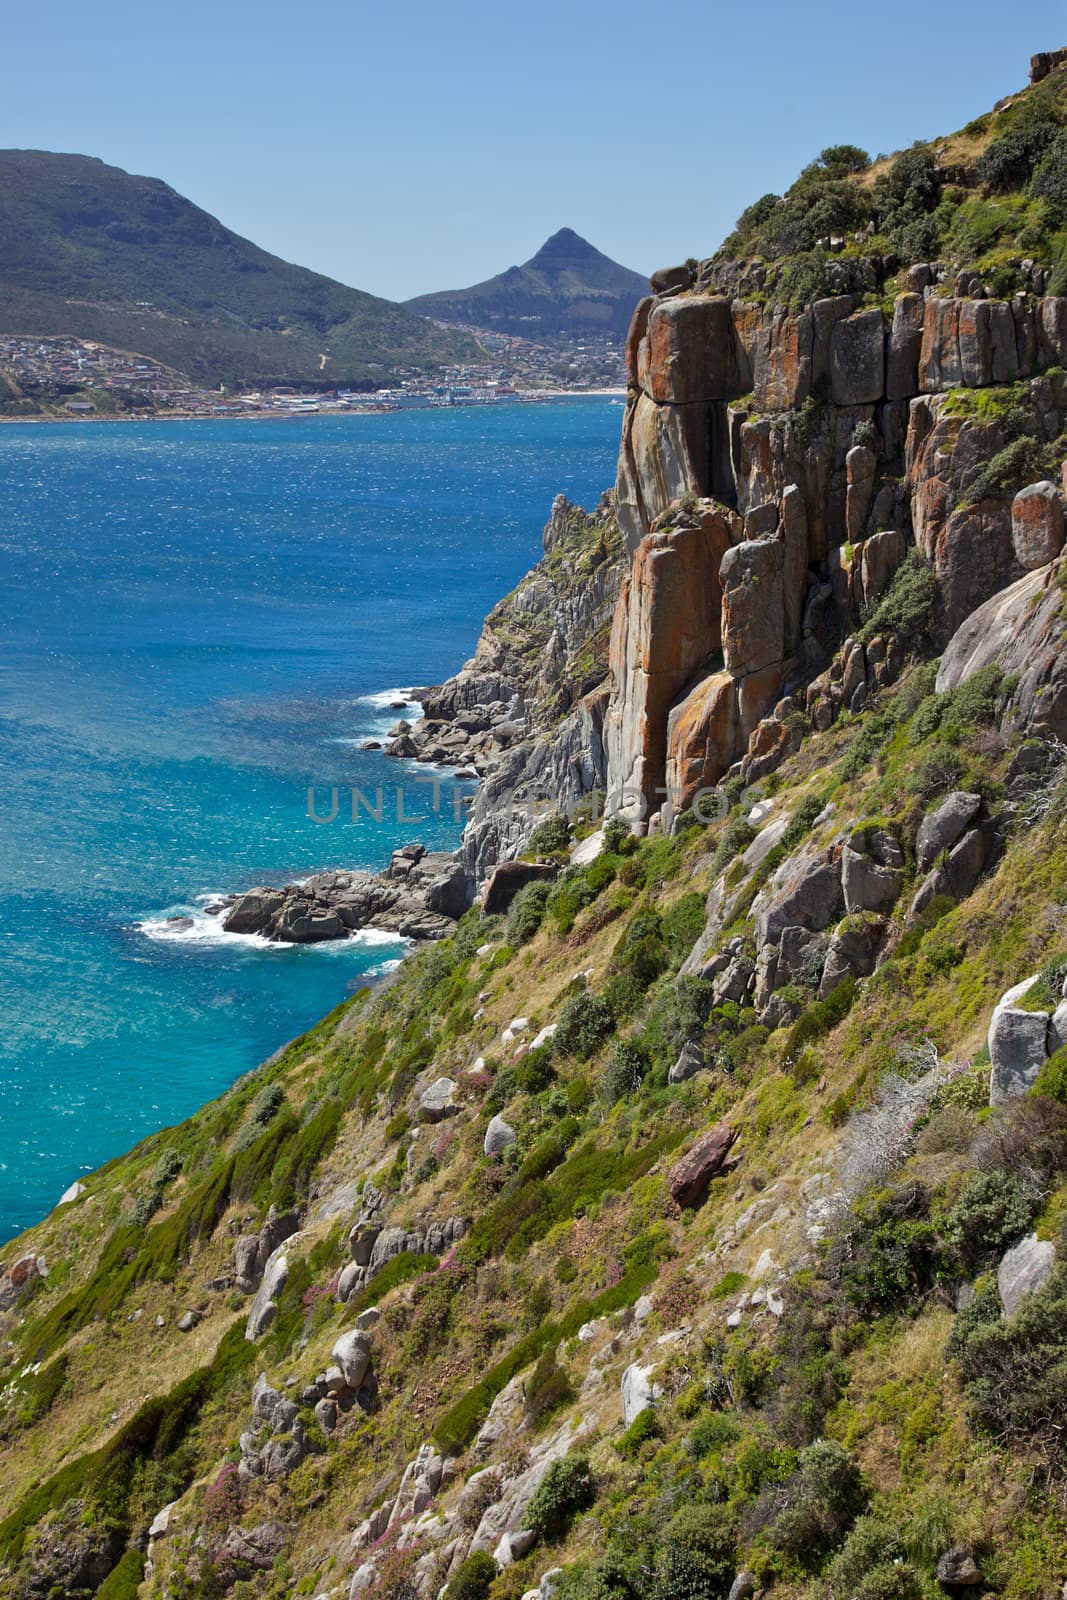 A view from Chapman's Peak Drive, with Hout Bay in the background, South Africa.